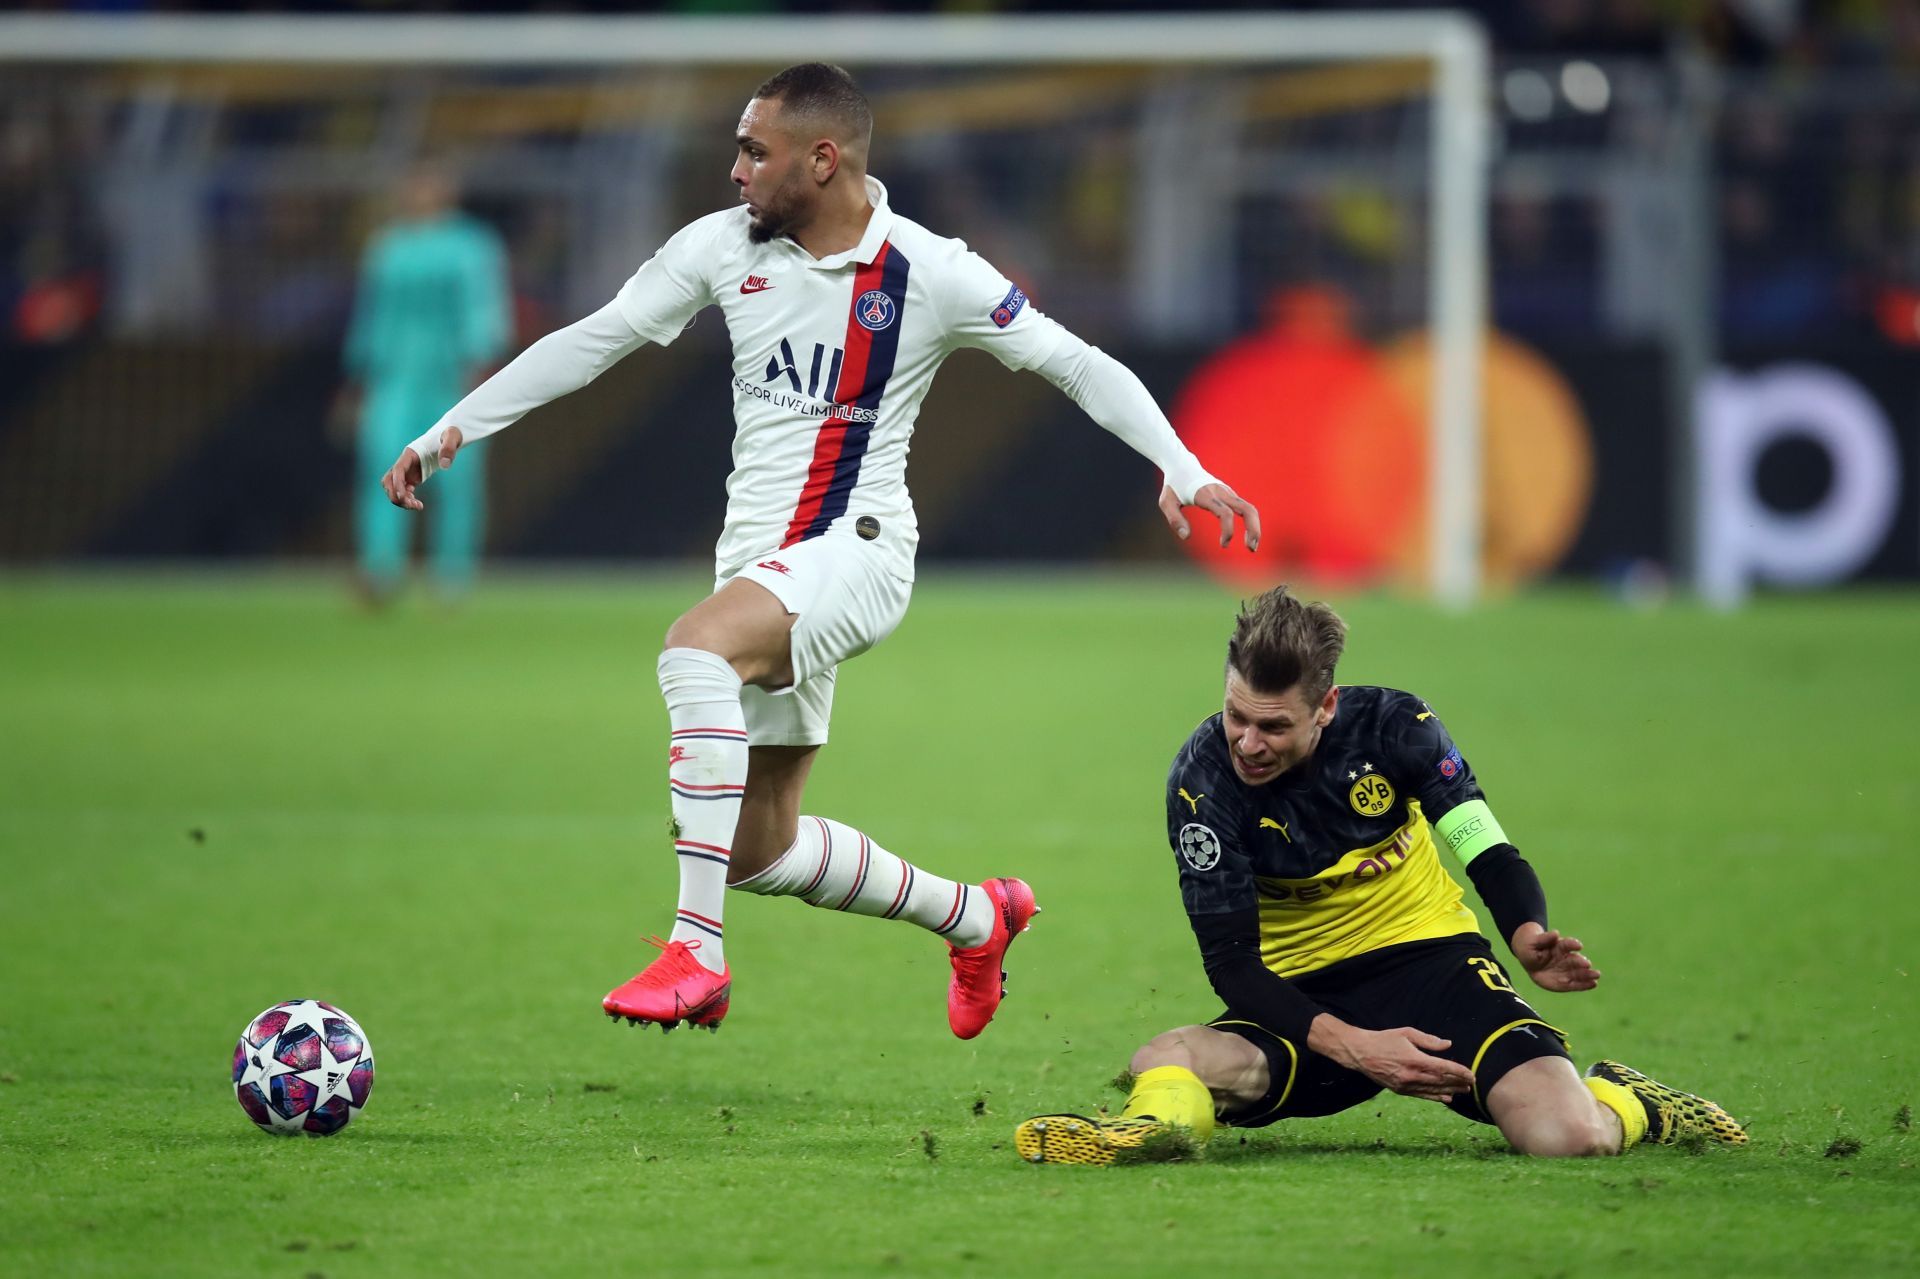 Kurzawa could be set to leave the PSG this summer